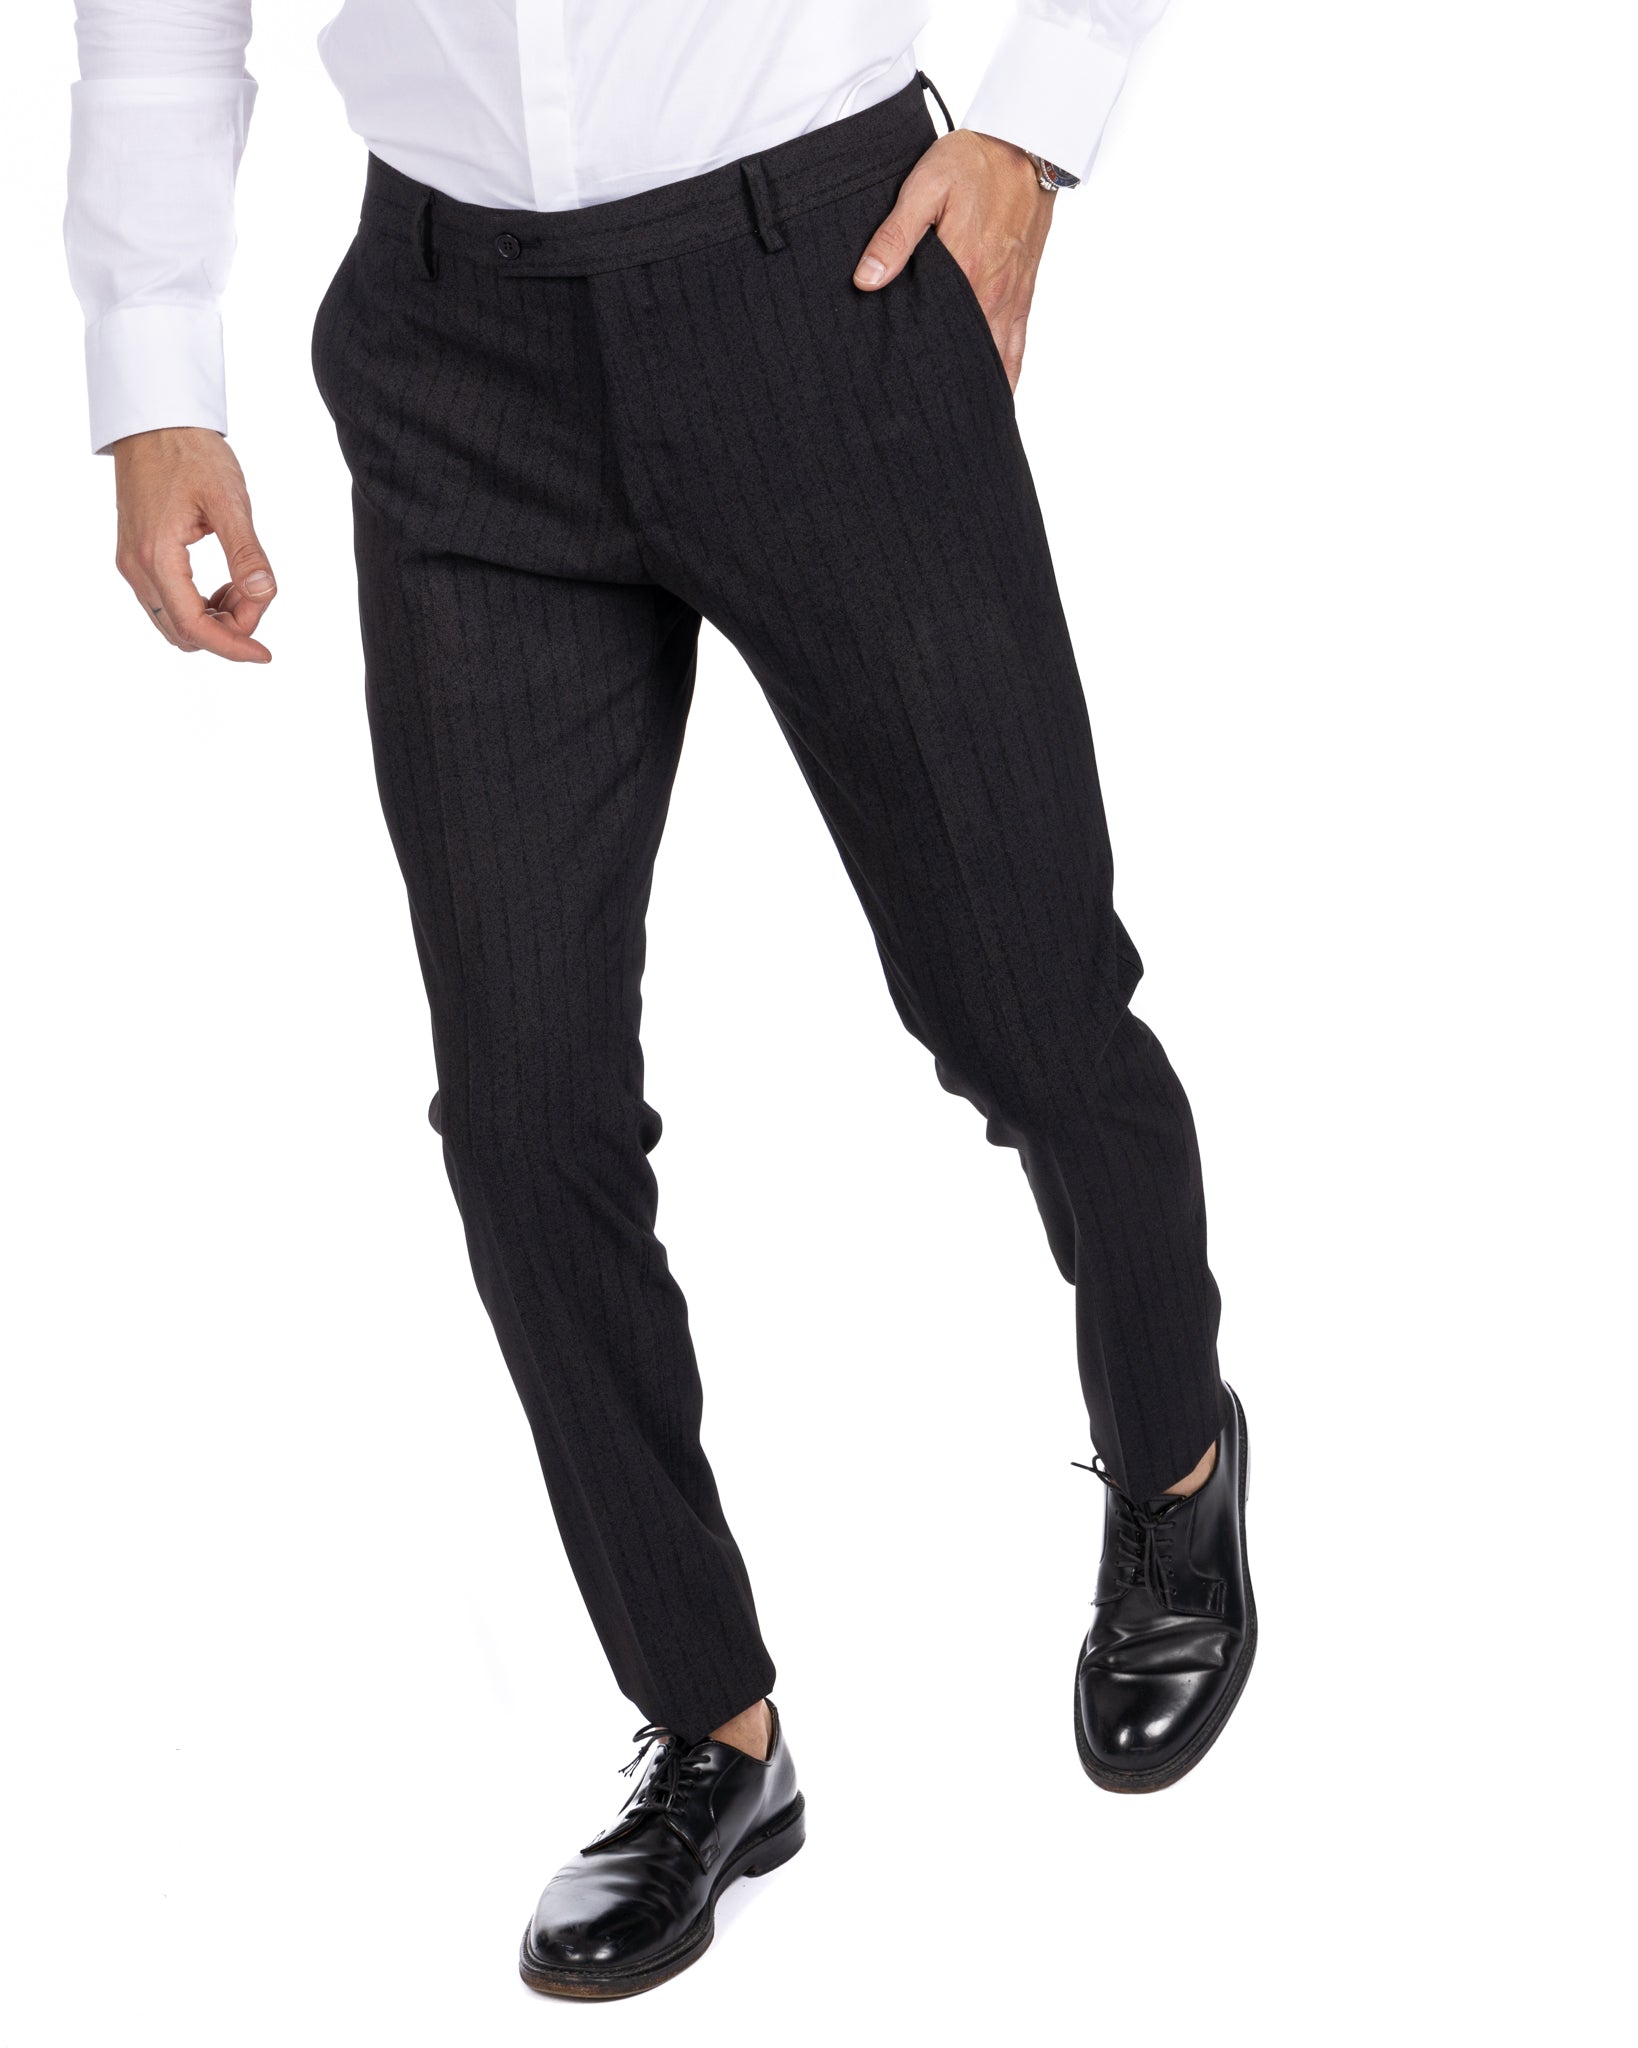 Enzo - anthracite double-breasted pinstripe suit